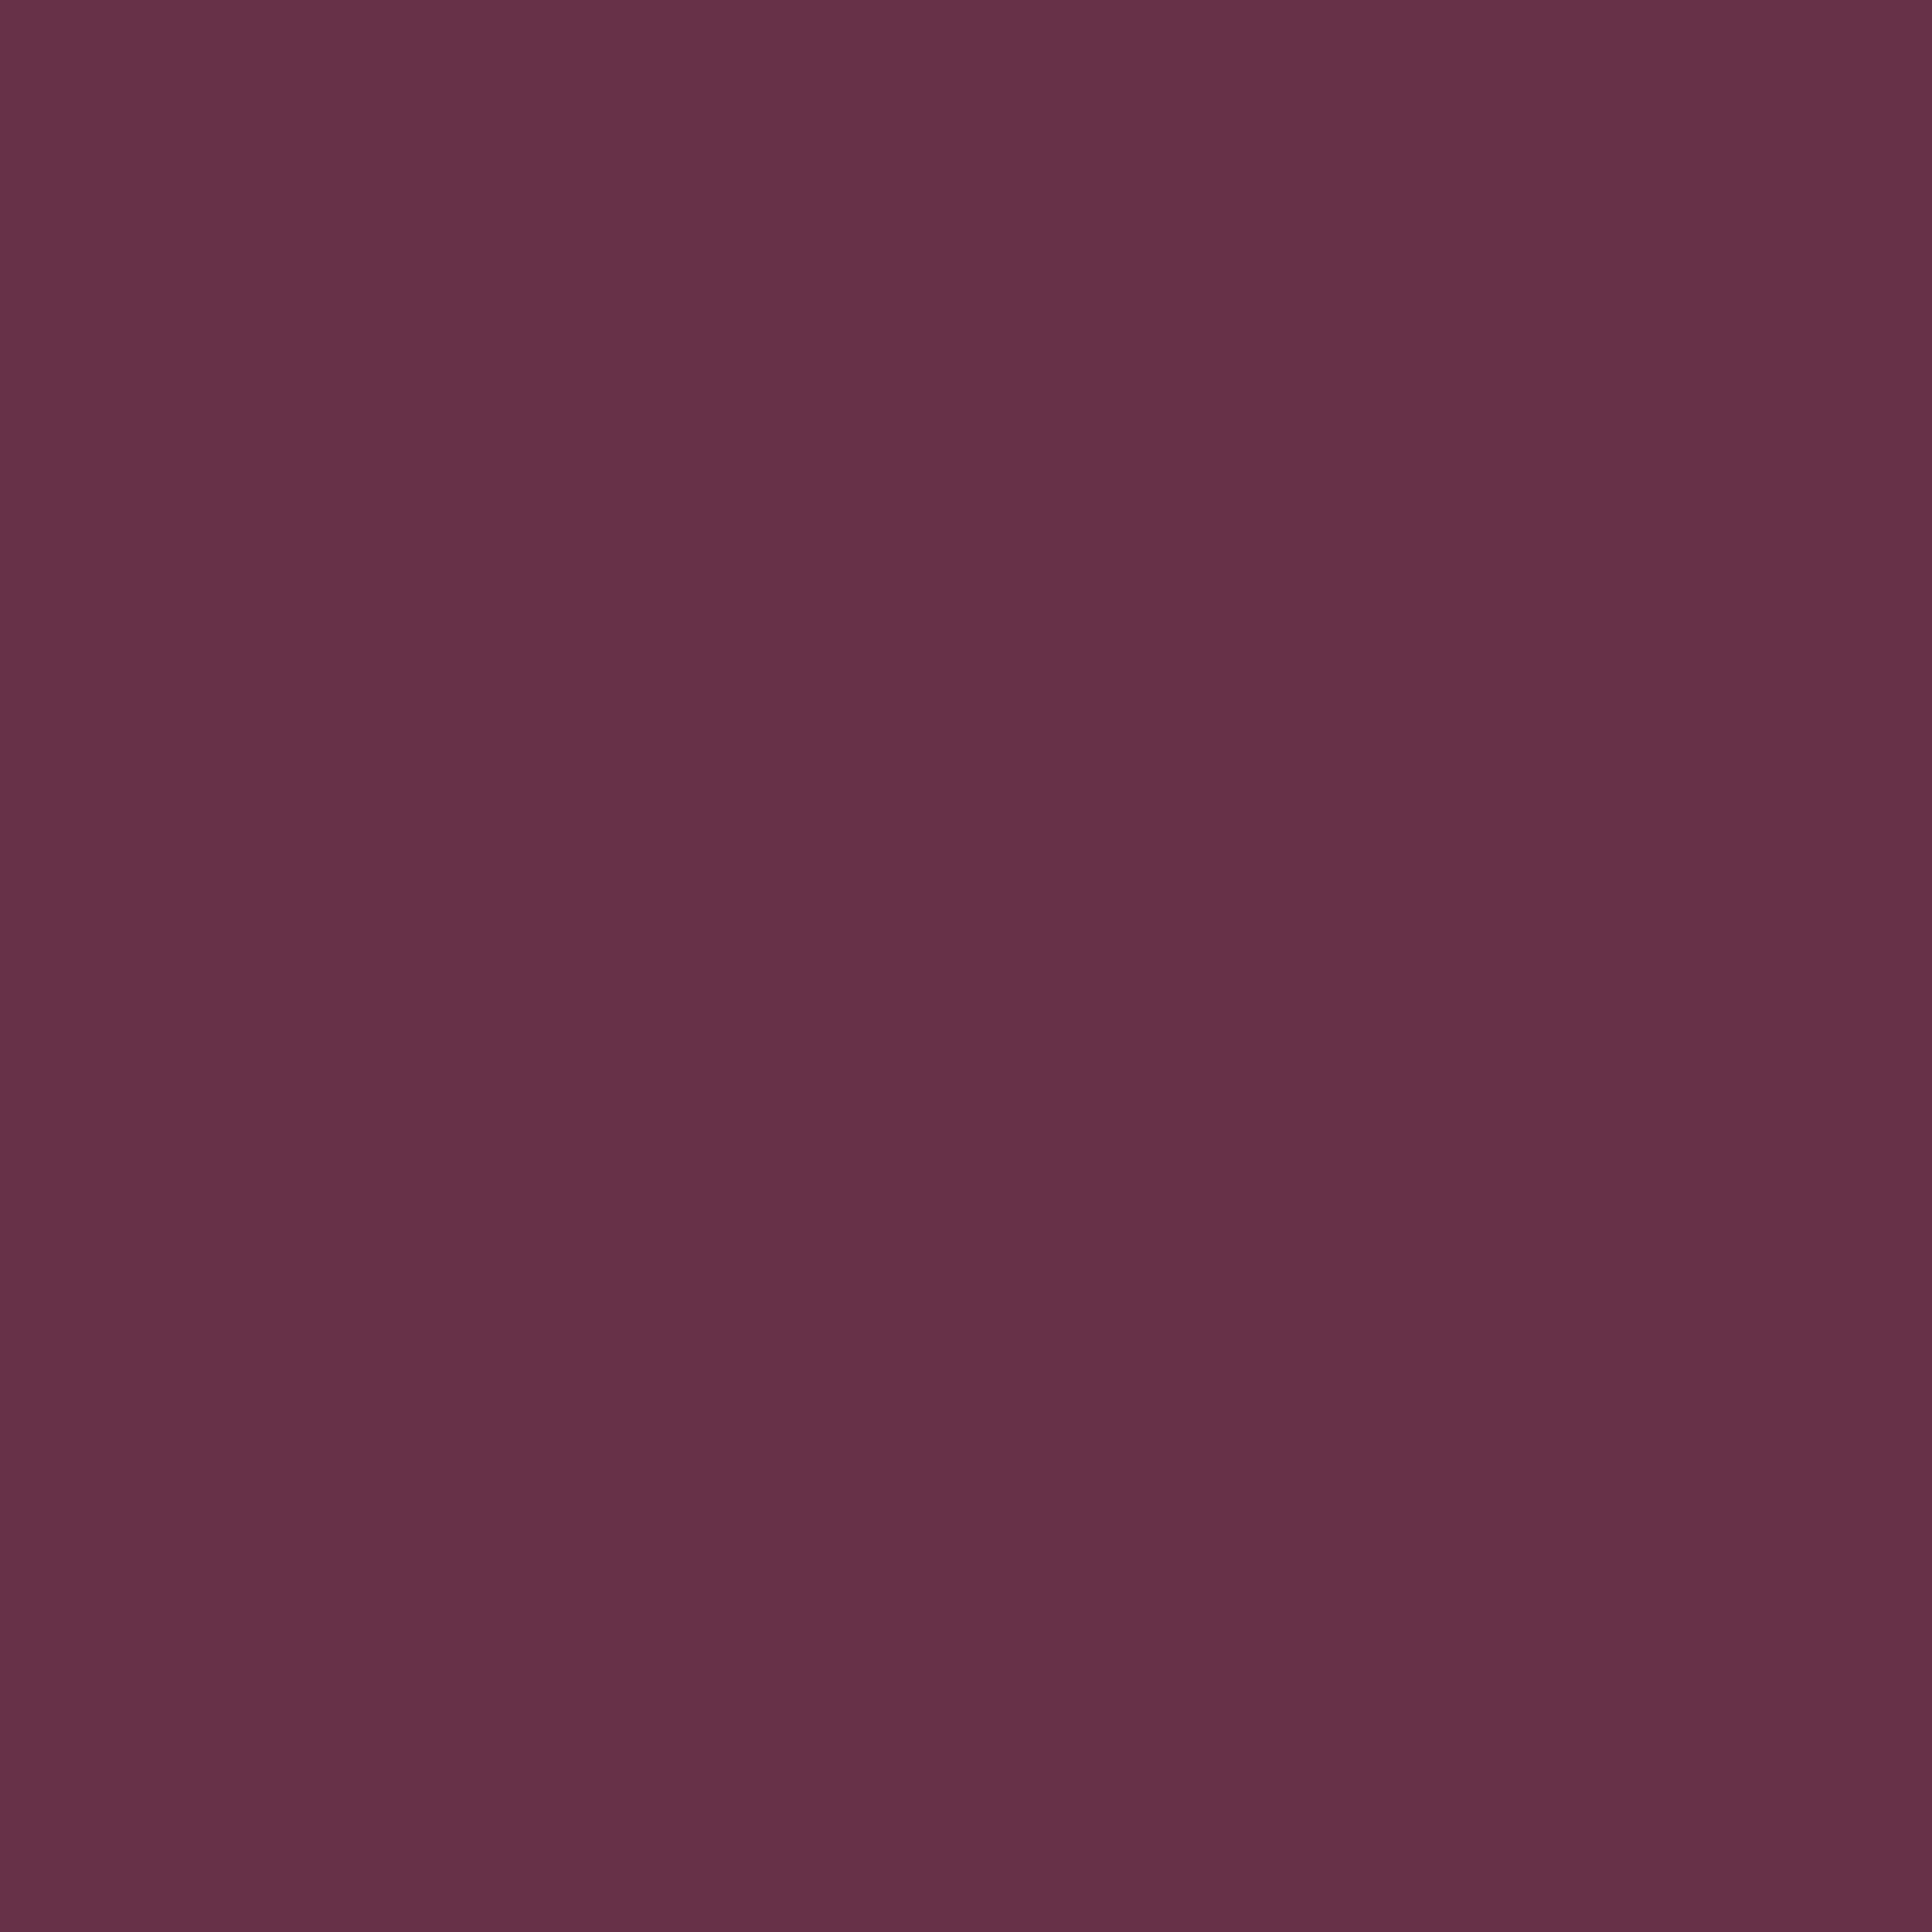 3600x3600 Old Mauve Solid Color Background